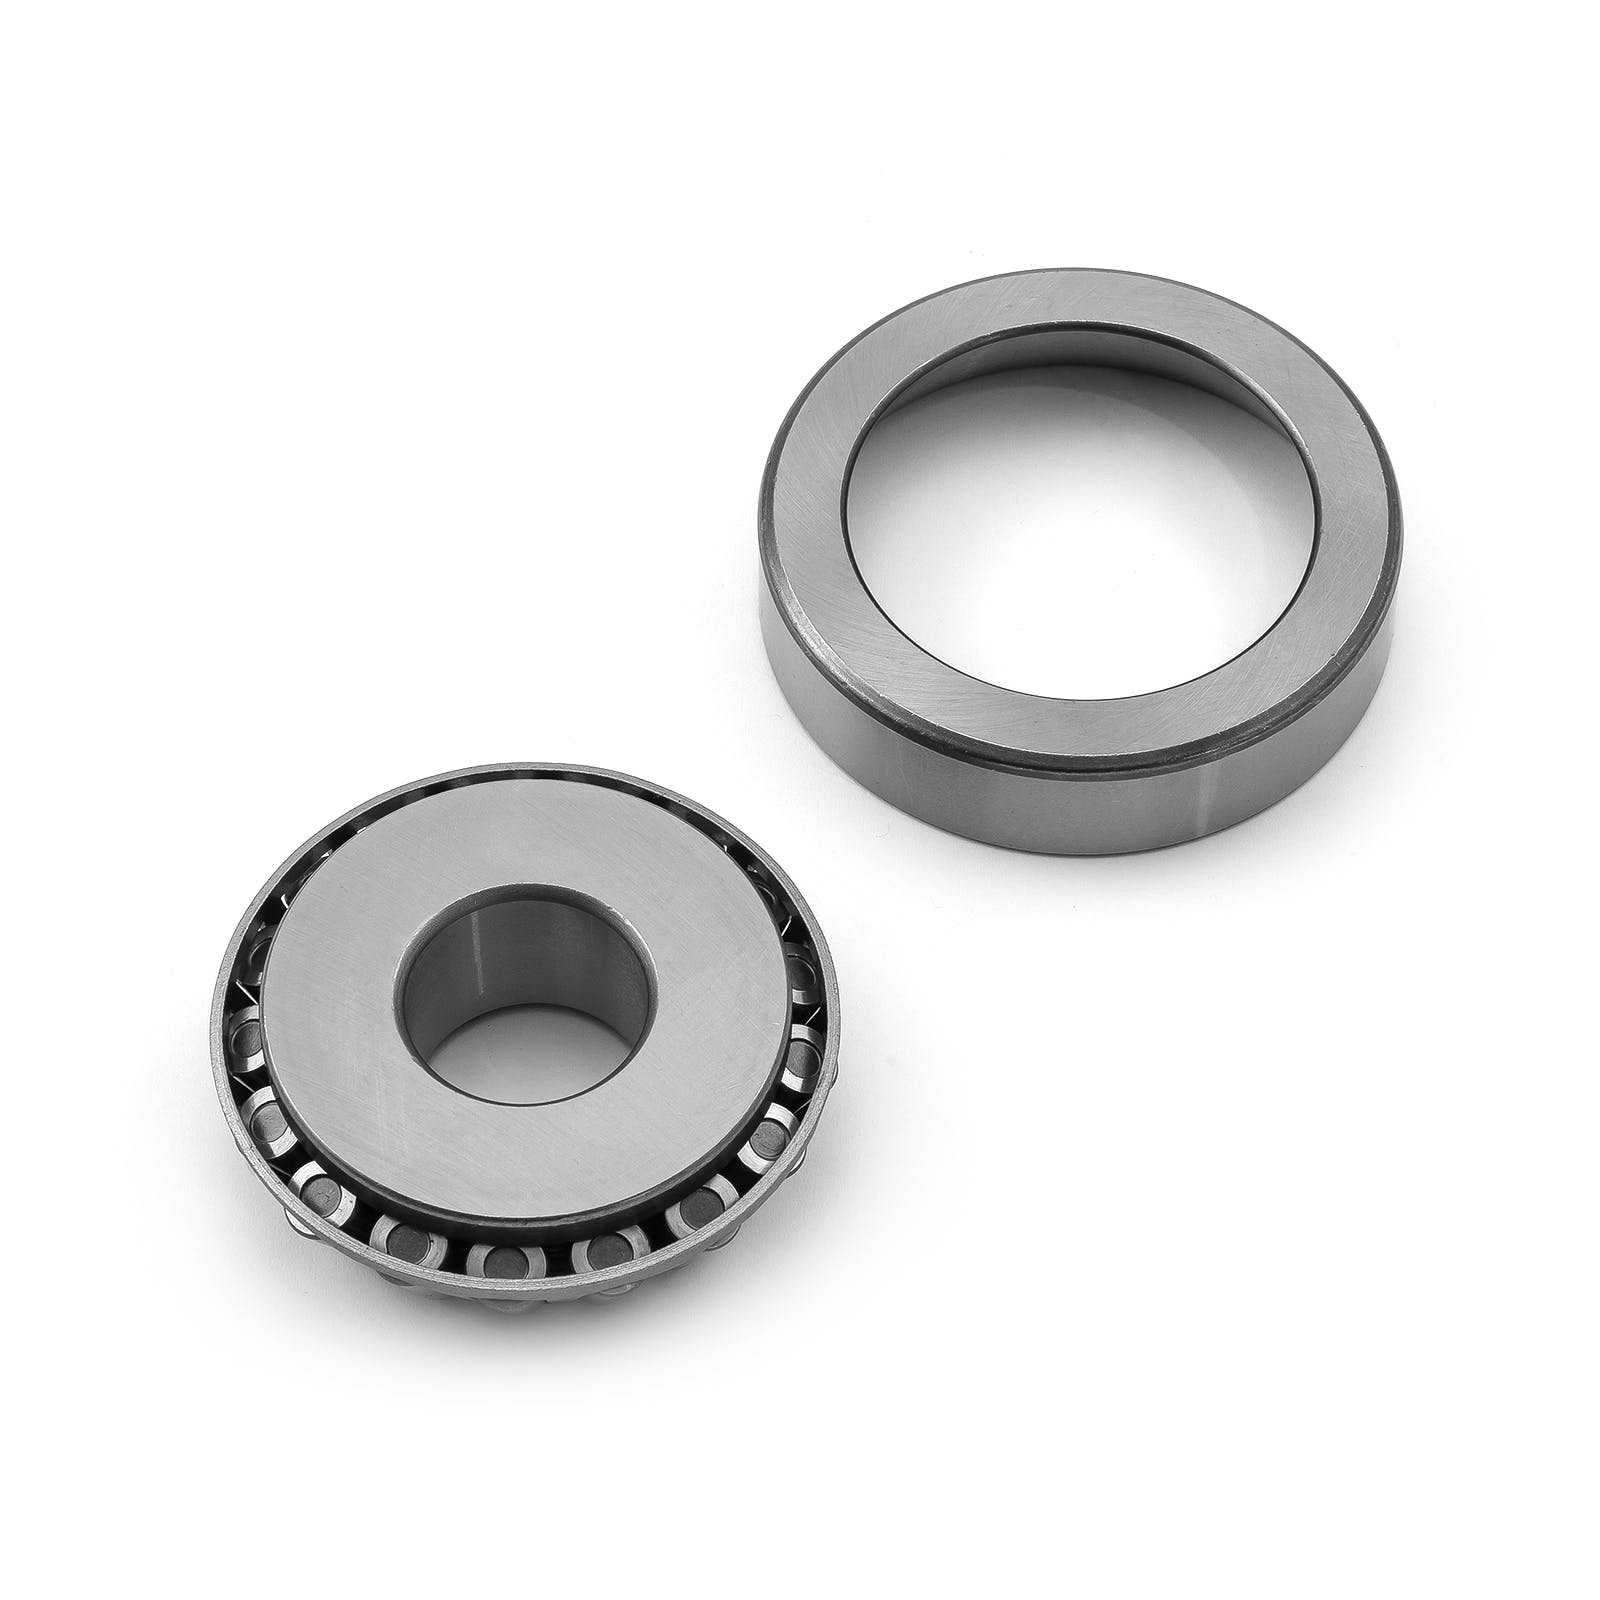 Speedmaster PCE207.1010 Pinion Bearing w/ 1.3125 Journal to suit Oversize Pinion Support